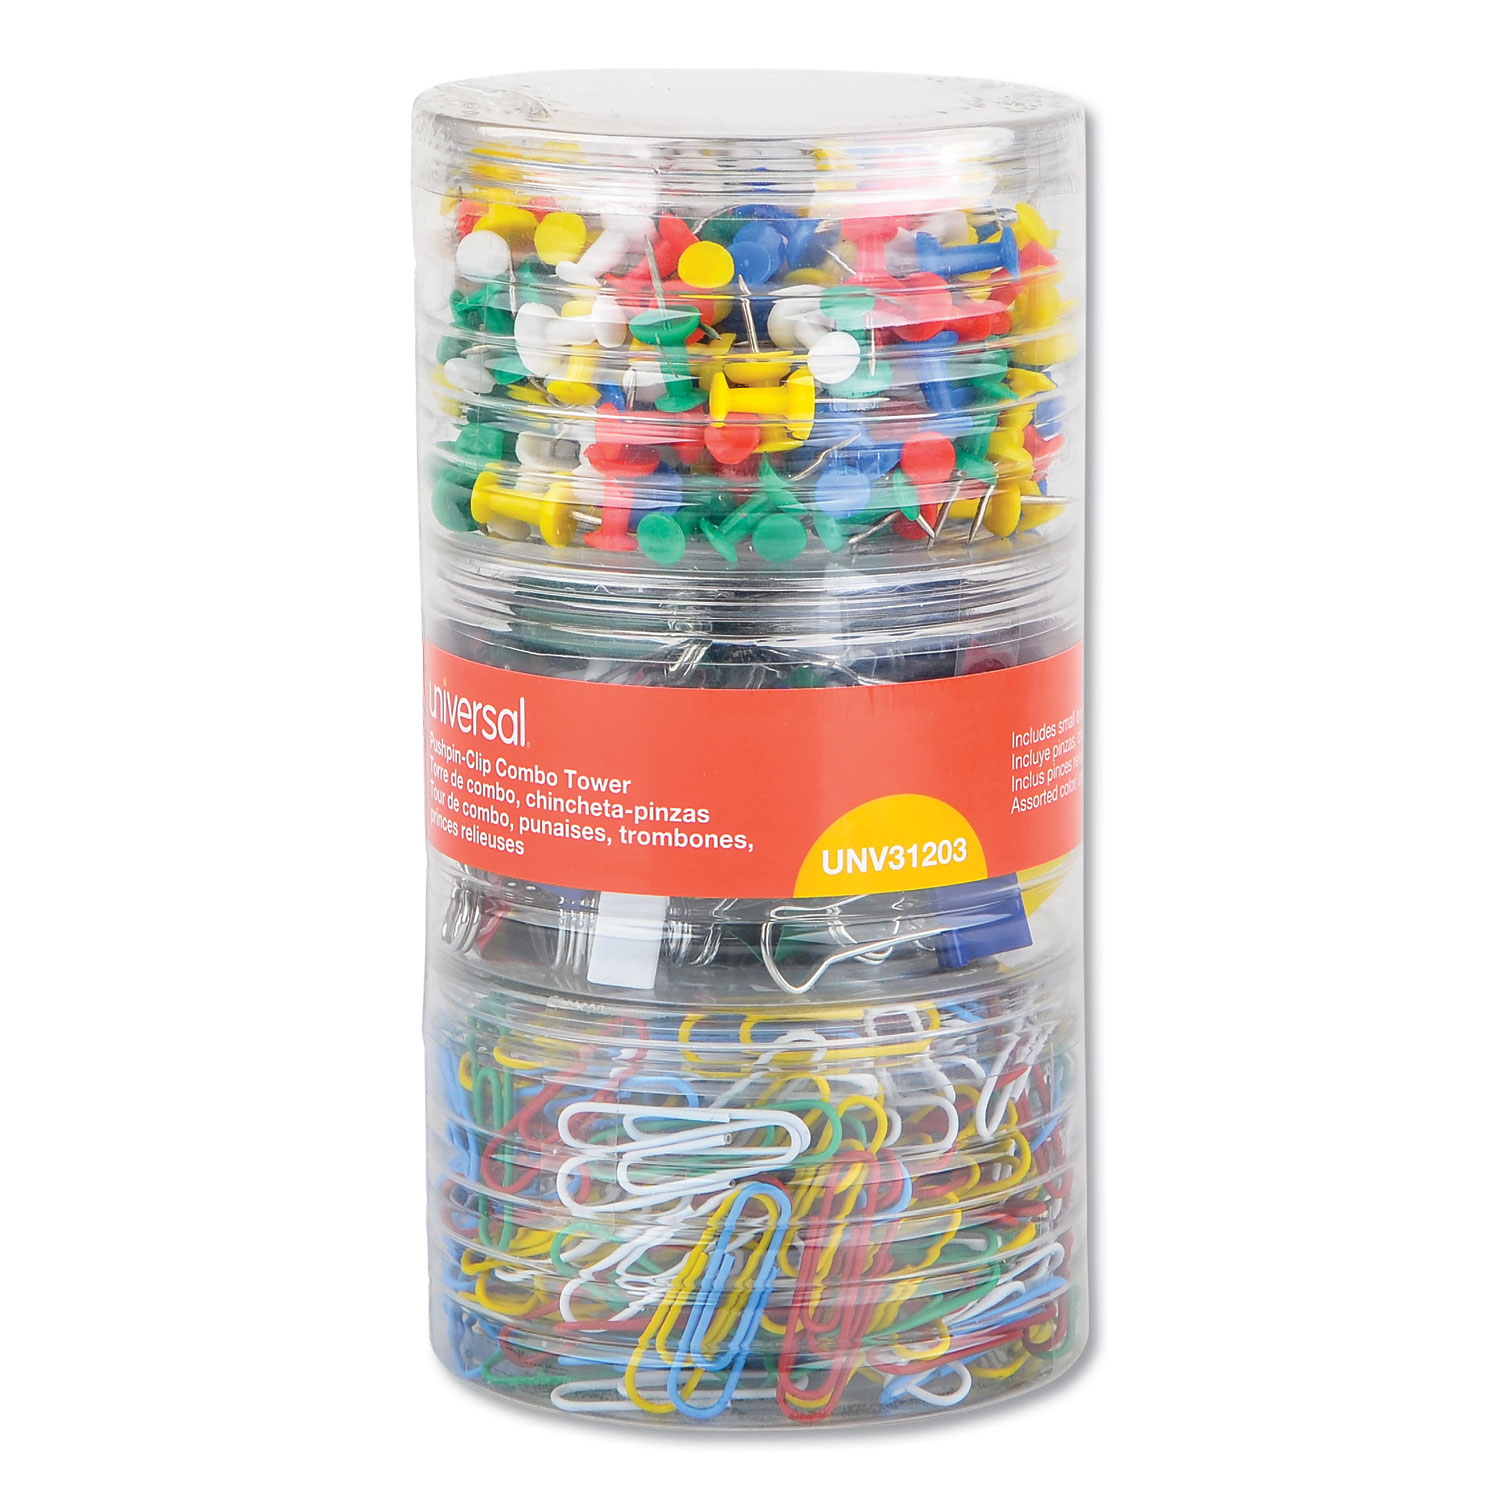  Universal UNV31203 Combo Clip Pack, 380 Paper Clips, 280 Push Pins and 46 Binder Clips (UNV31203) 